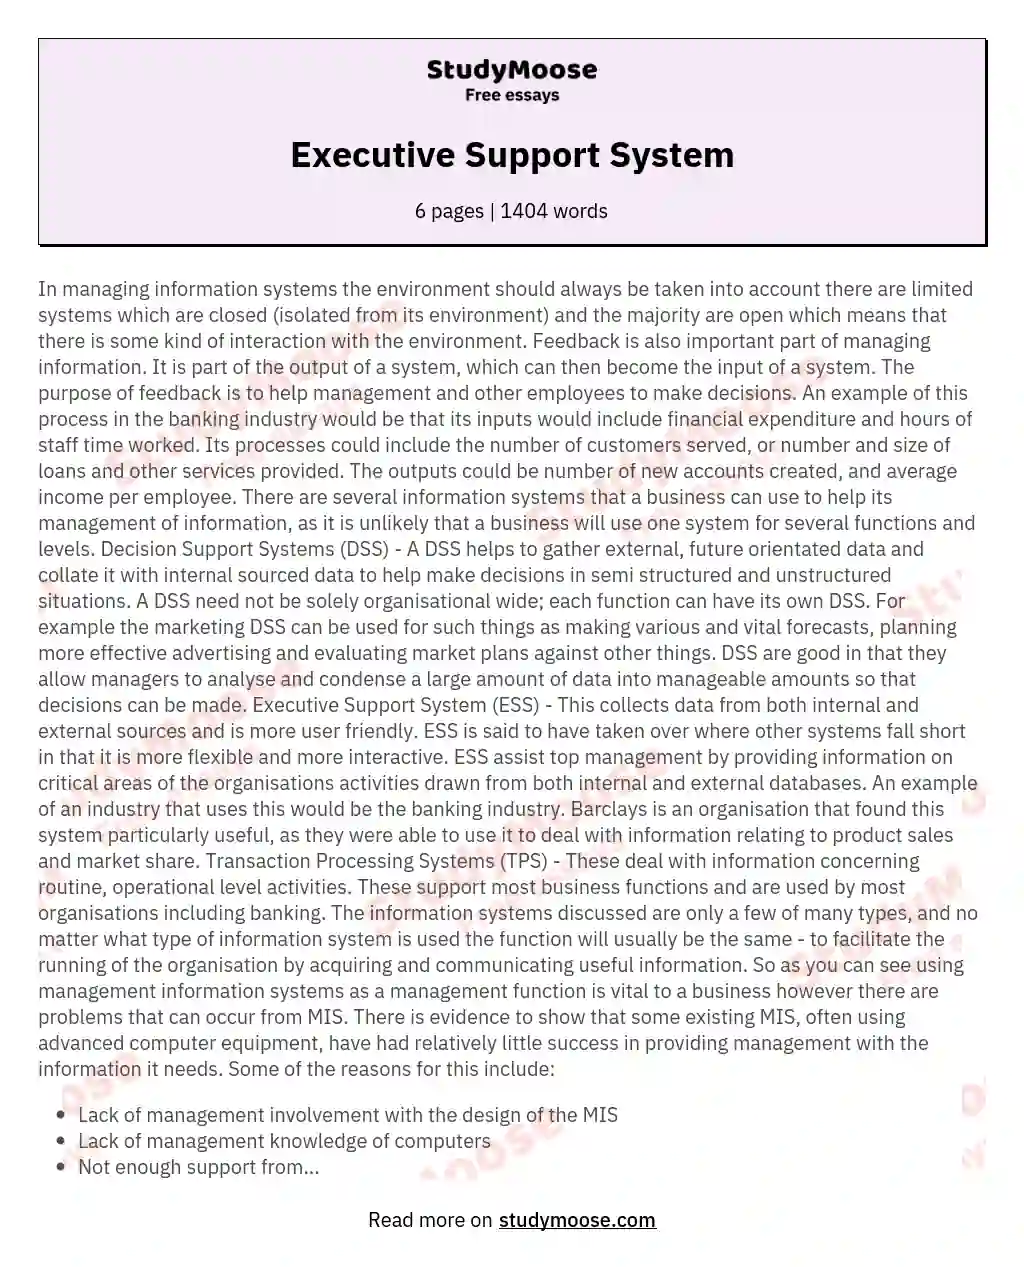 Executive Support System essay